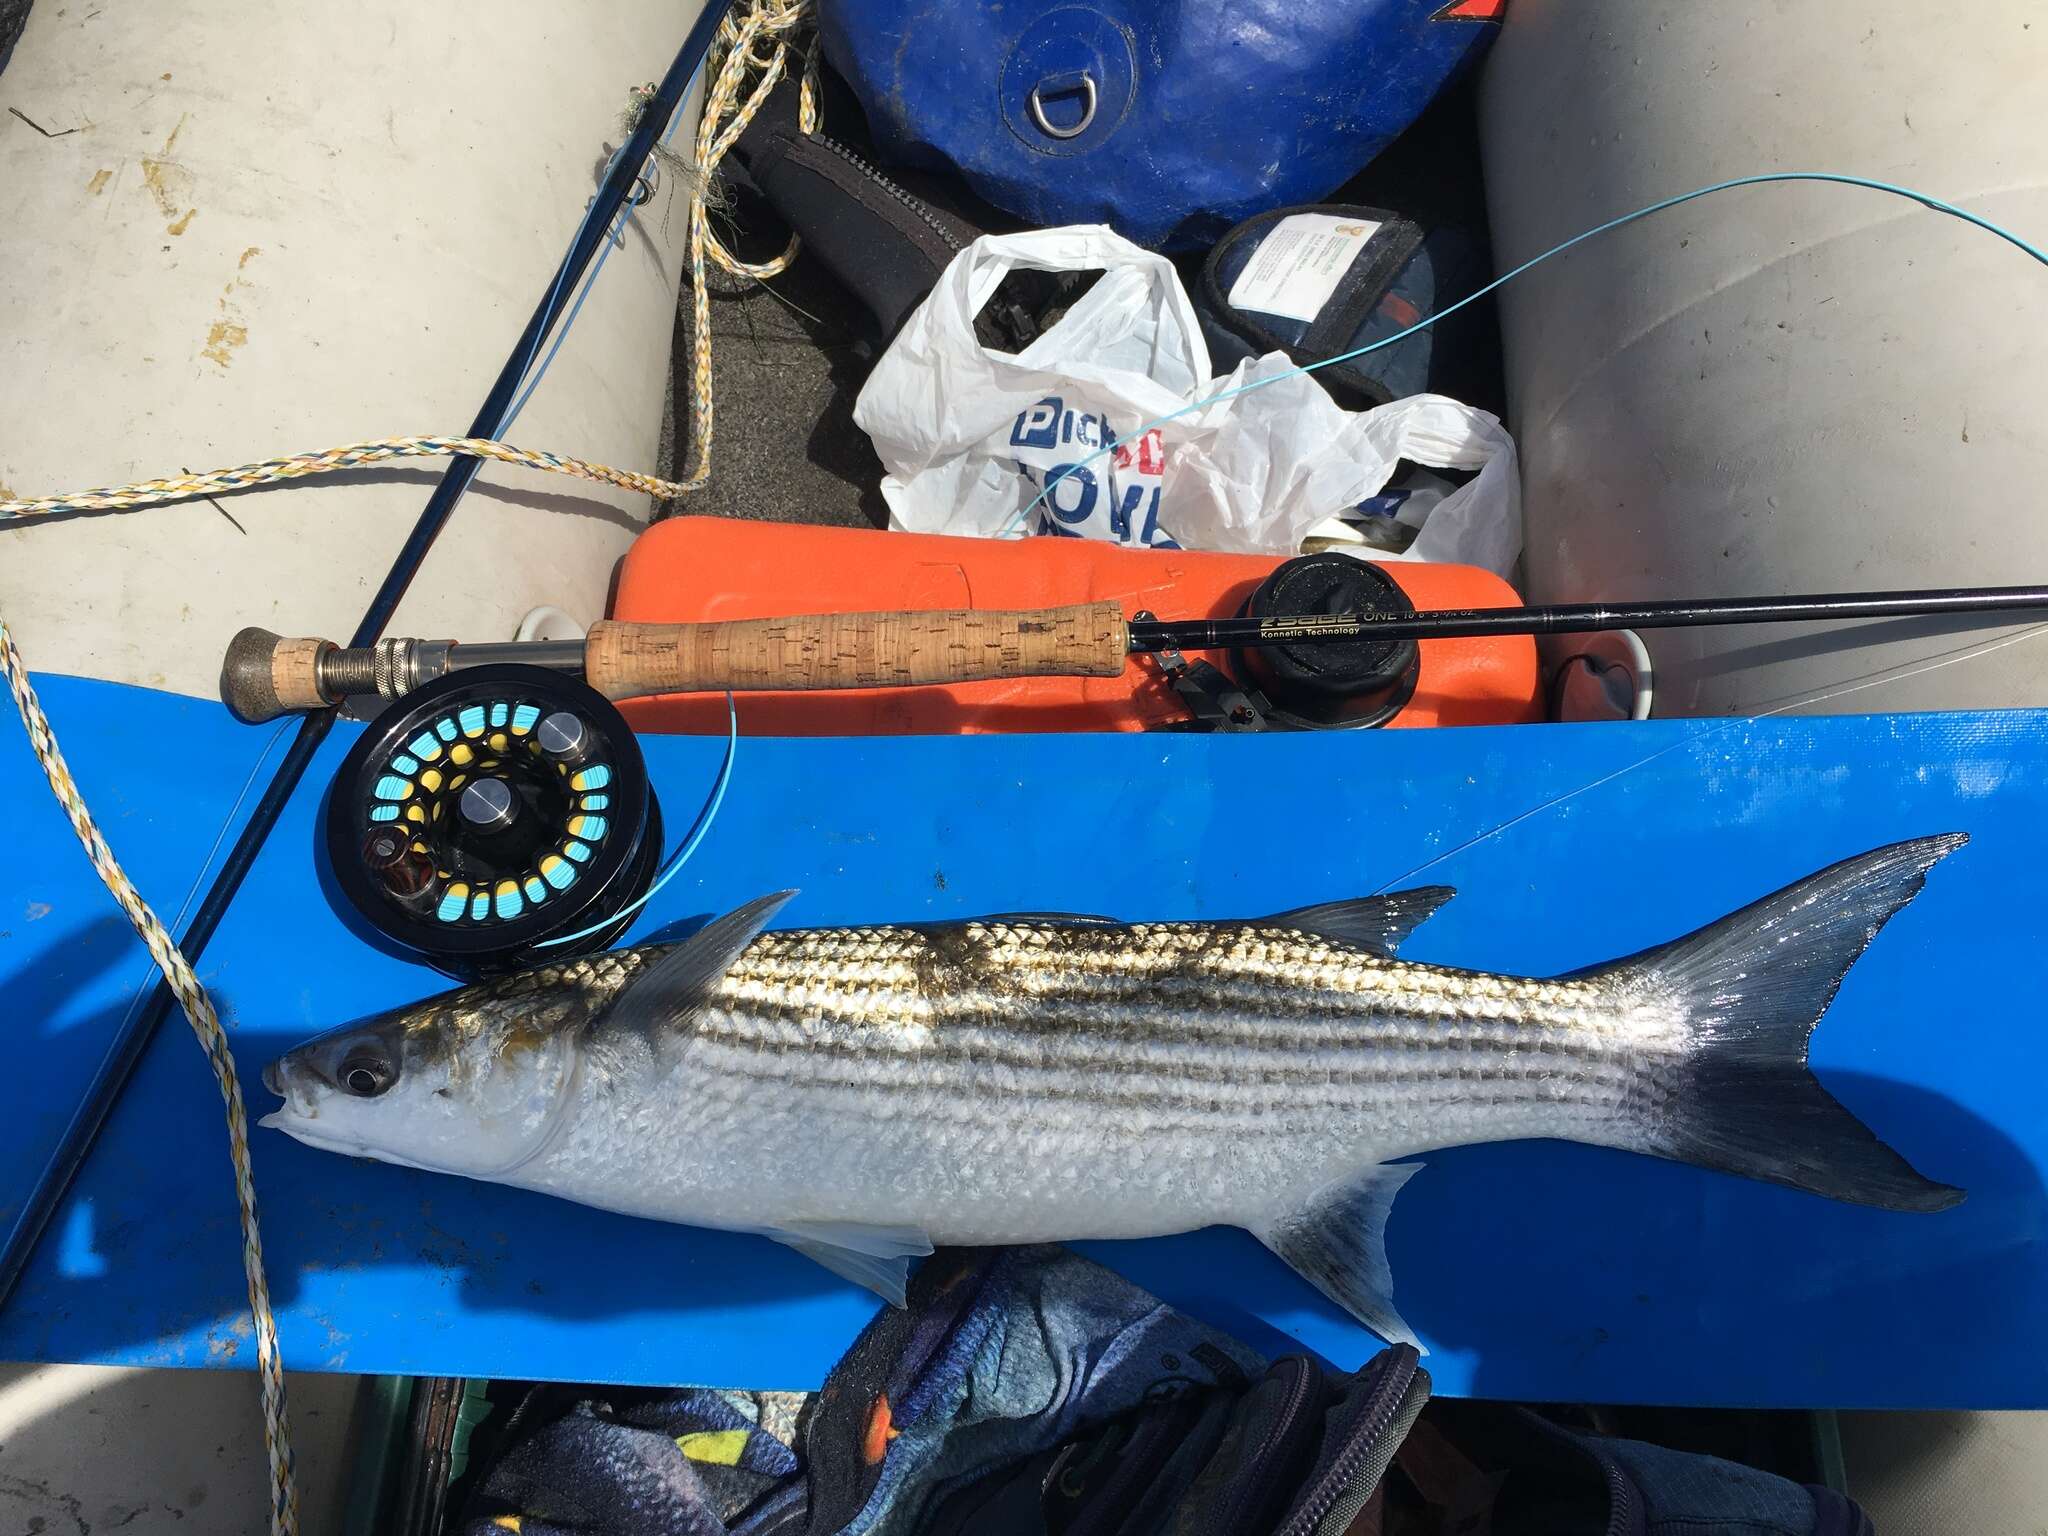 Image of Striped mullet